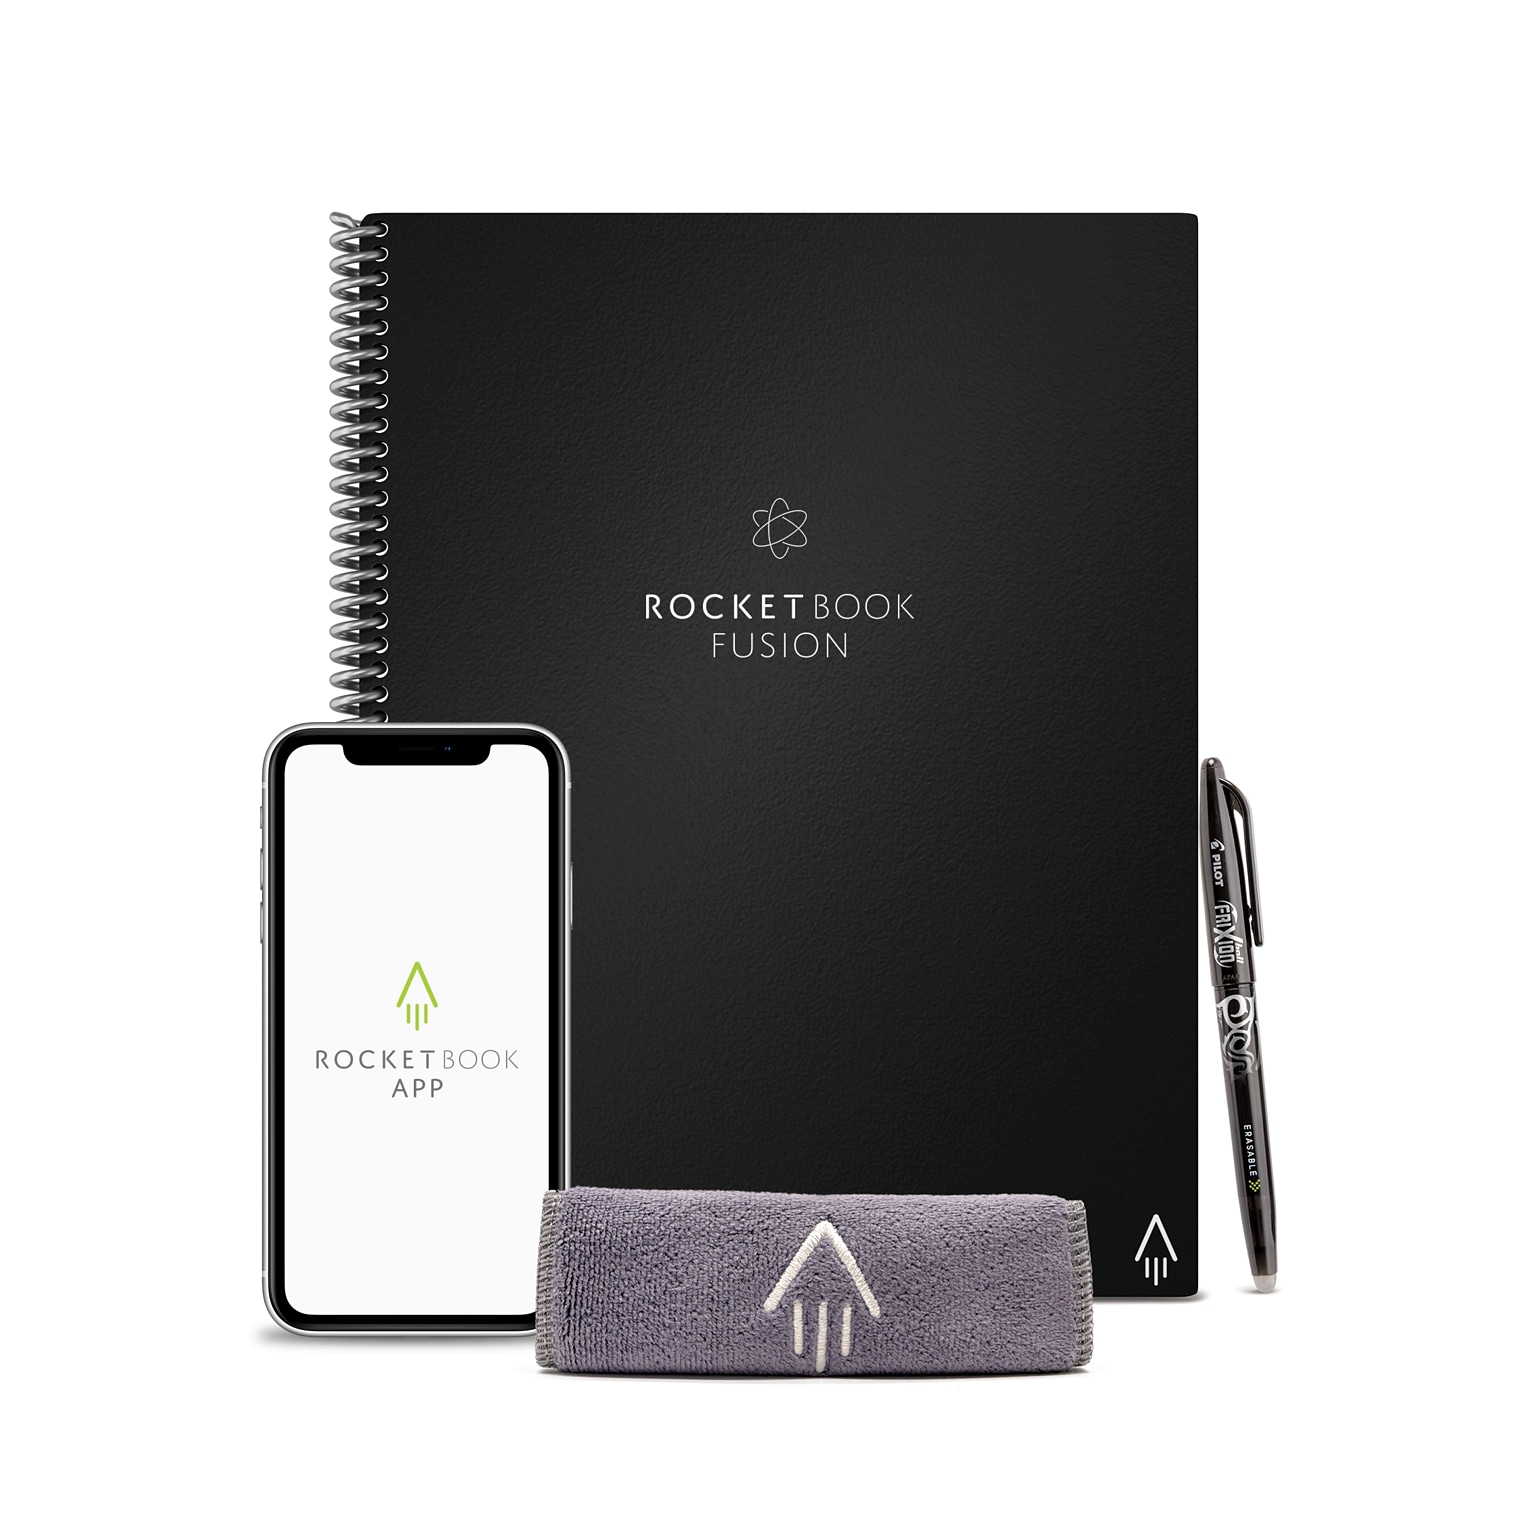 Rocketbook Fusion Reusable Notebook Planner Combo, 8.5 x 11, 7 Page Styles, 42 Pages, Black (EVRF-L-RC-A-FR)